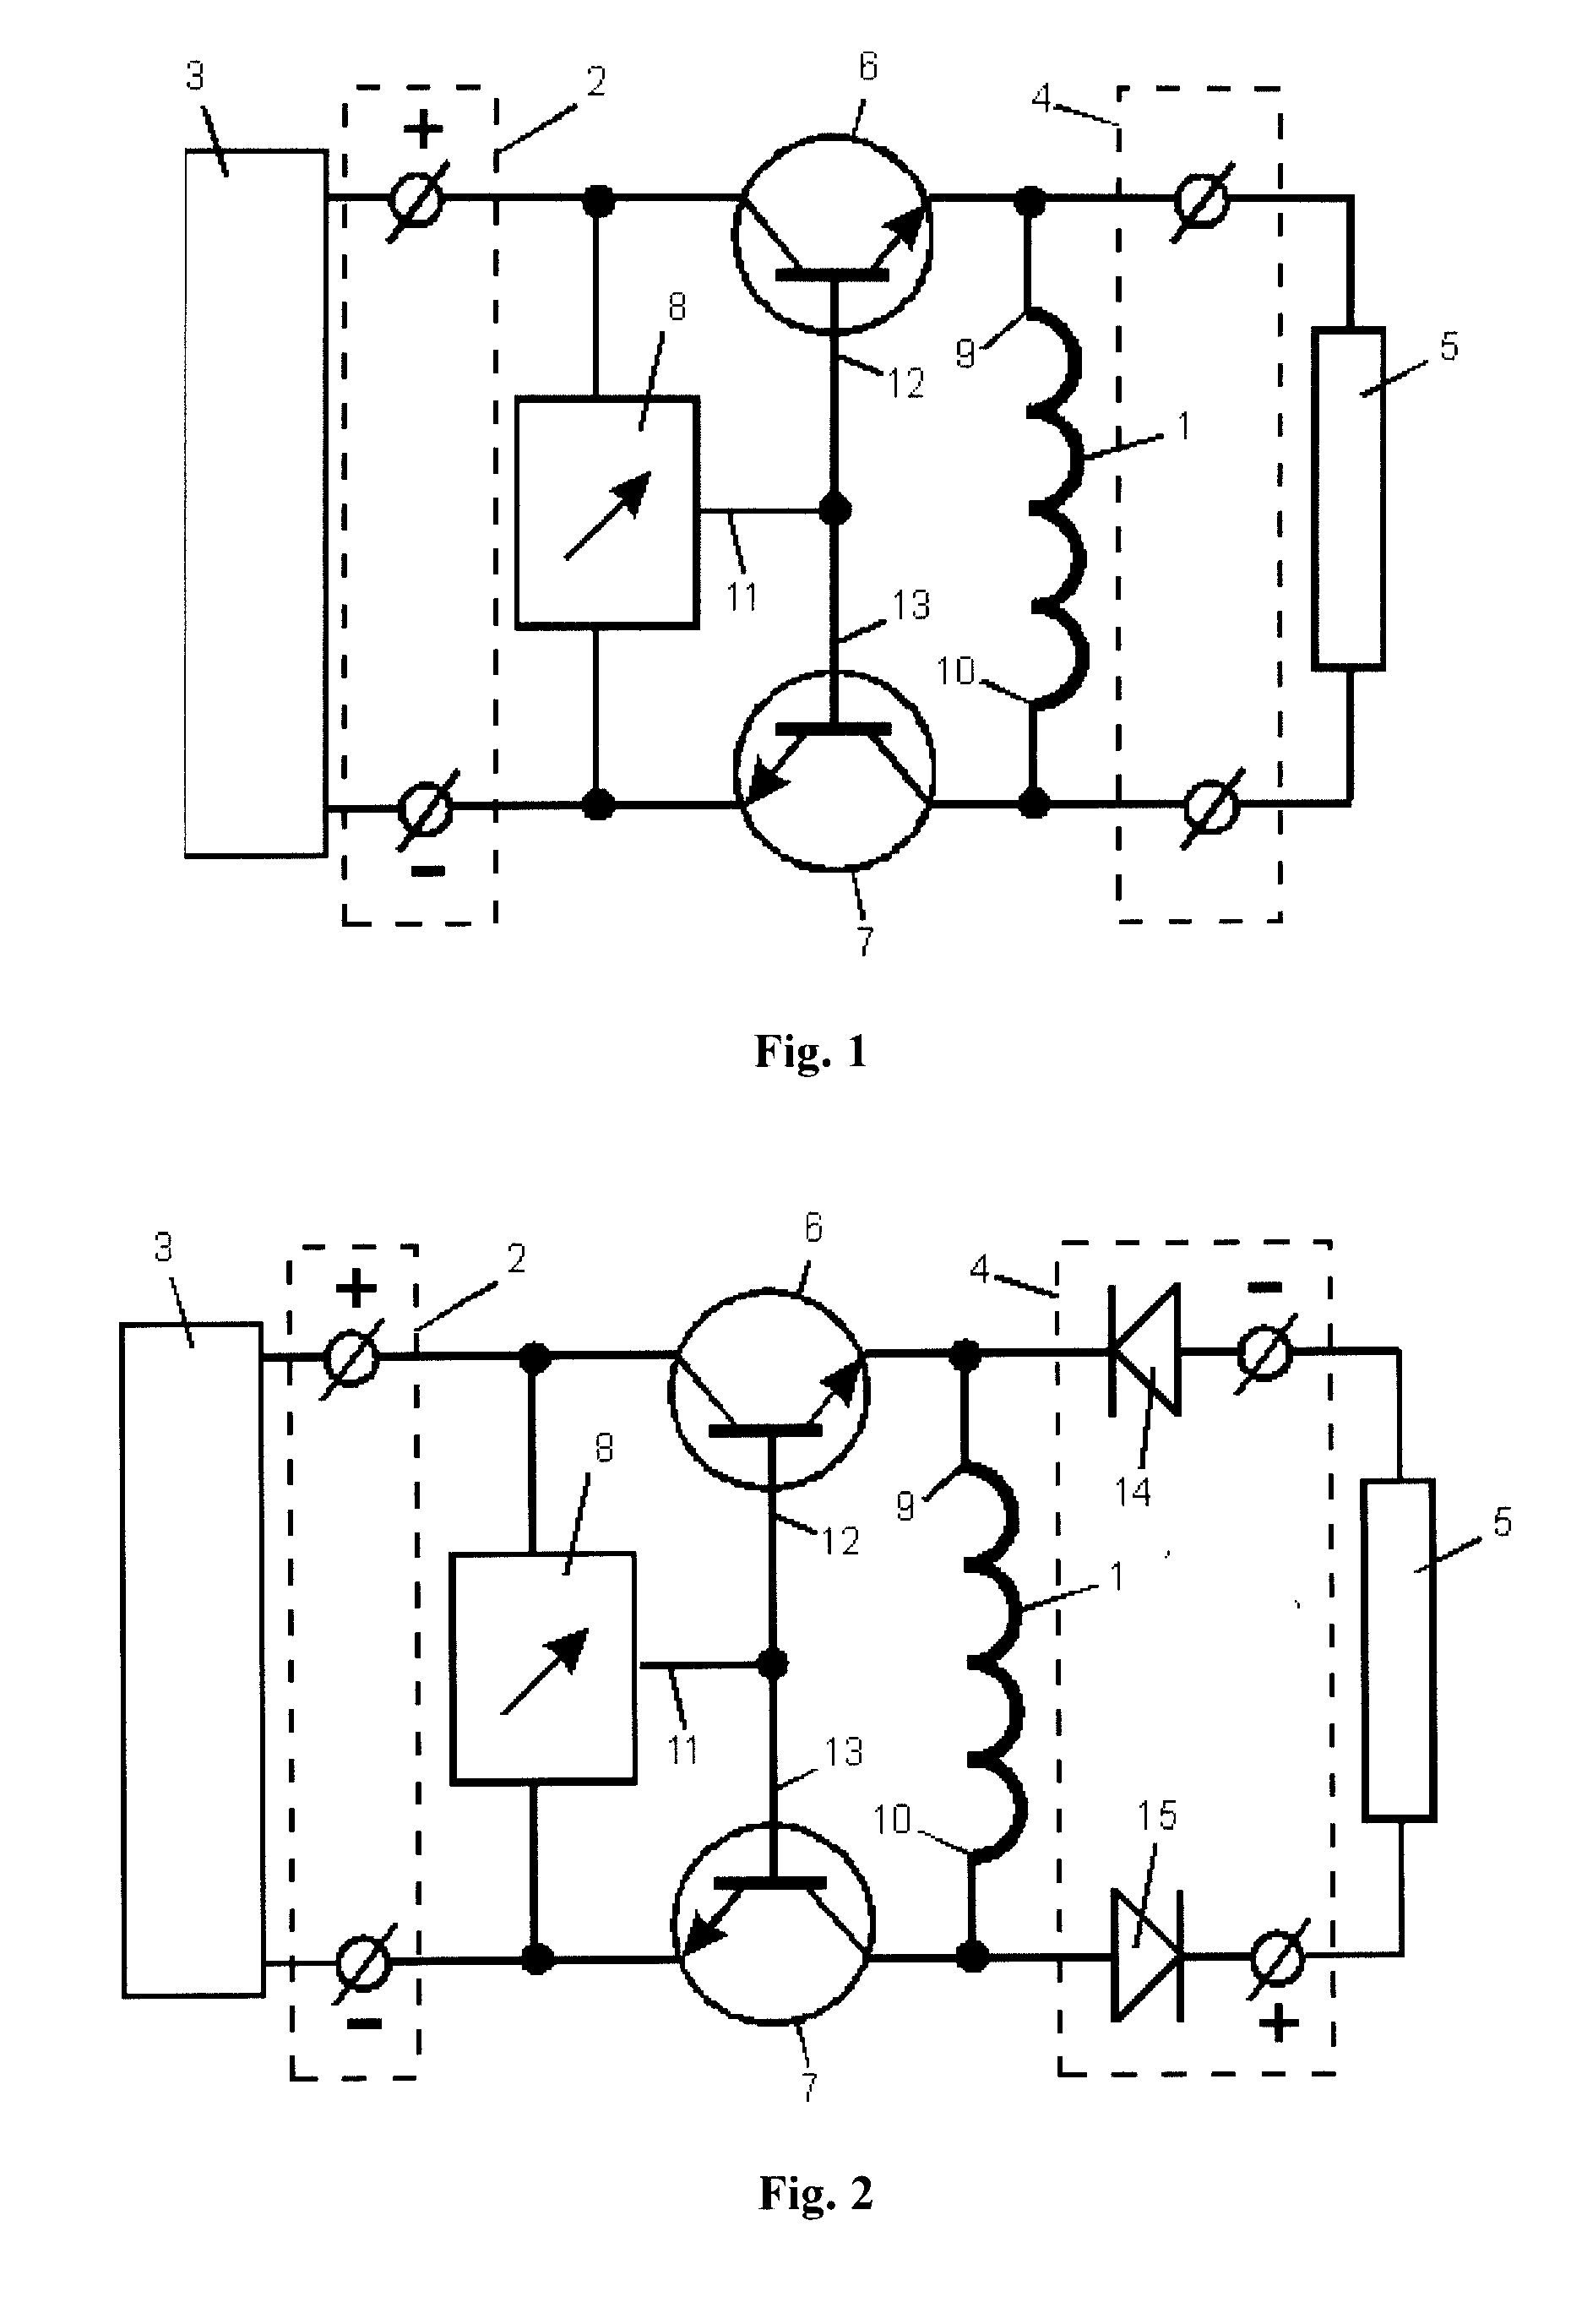 Power supply source for an electric heating system